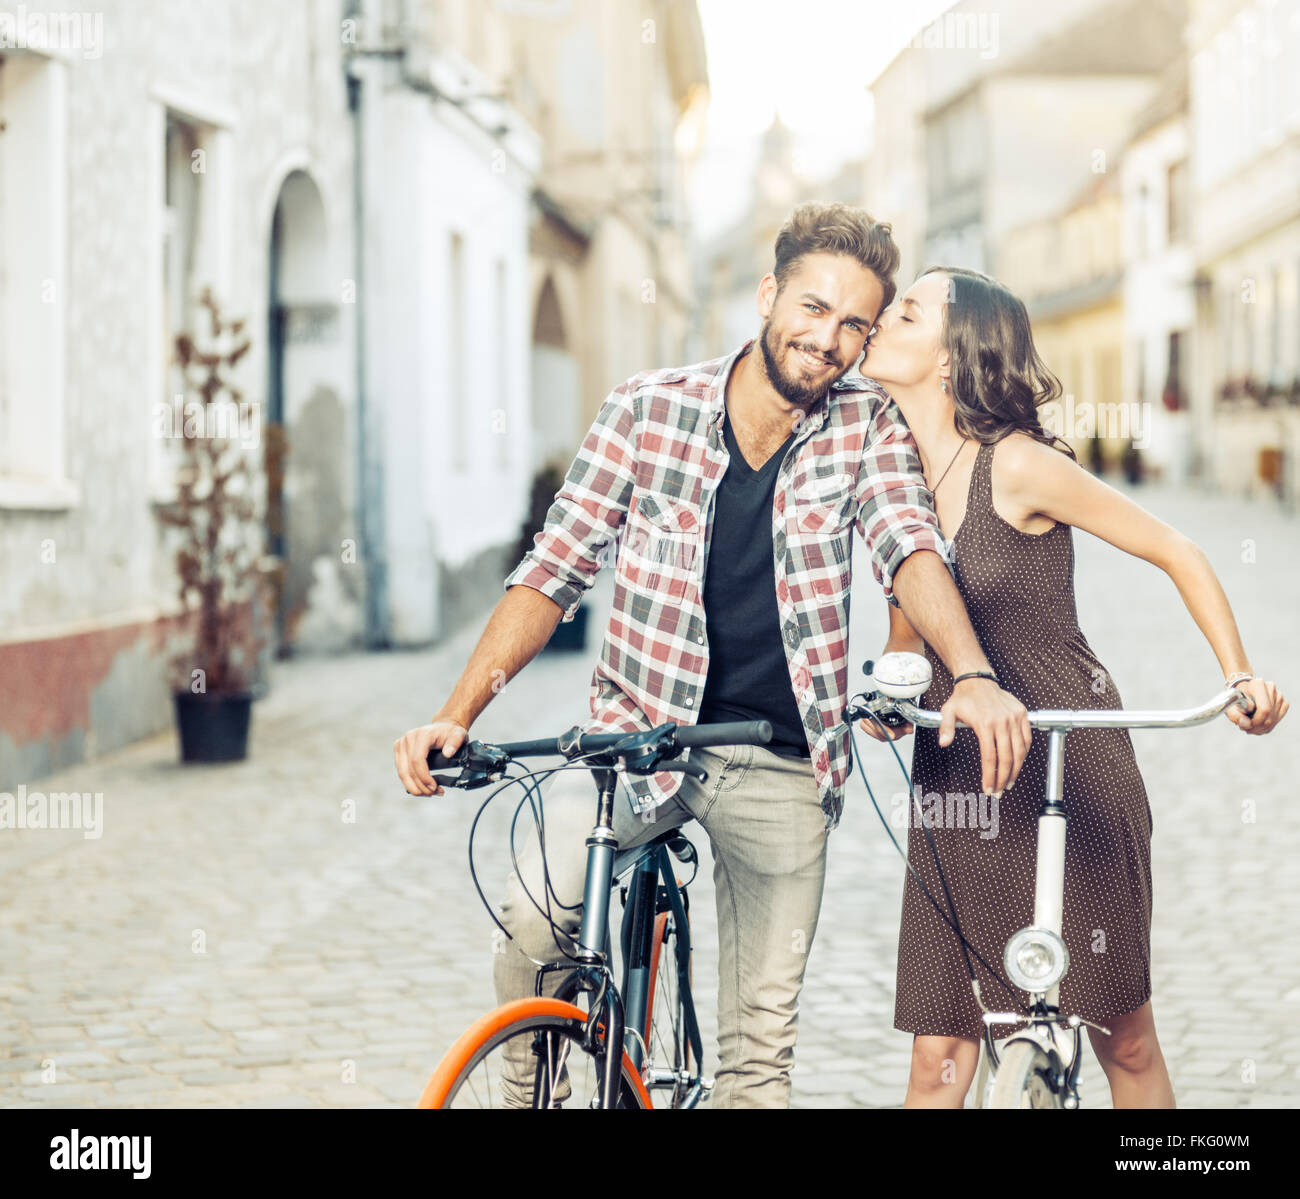 handsome young man with blue eyes stops cycling to be kissed on the cheek by his beautiful partner dressed in brown dress with p Stock Photo